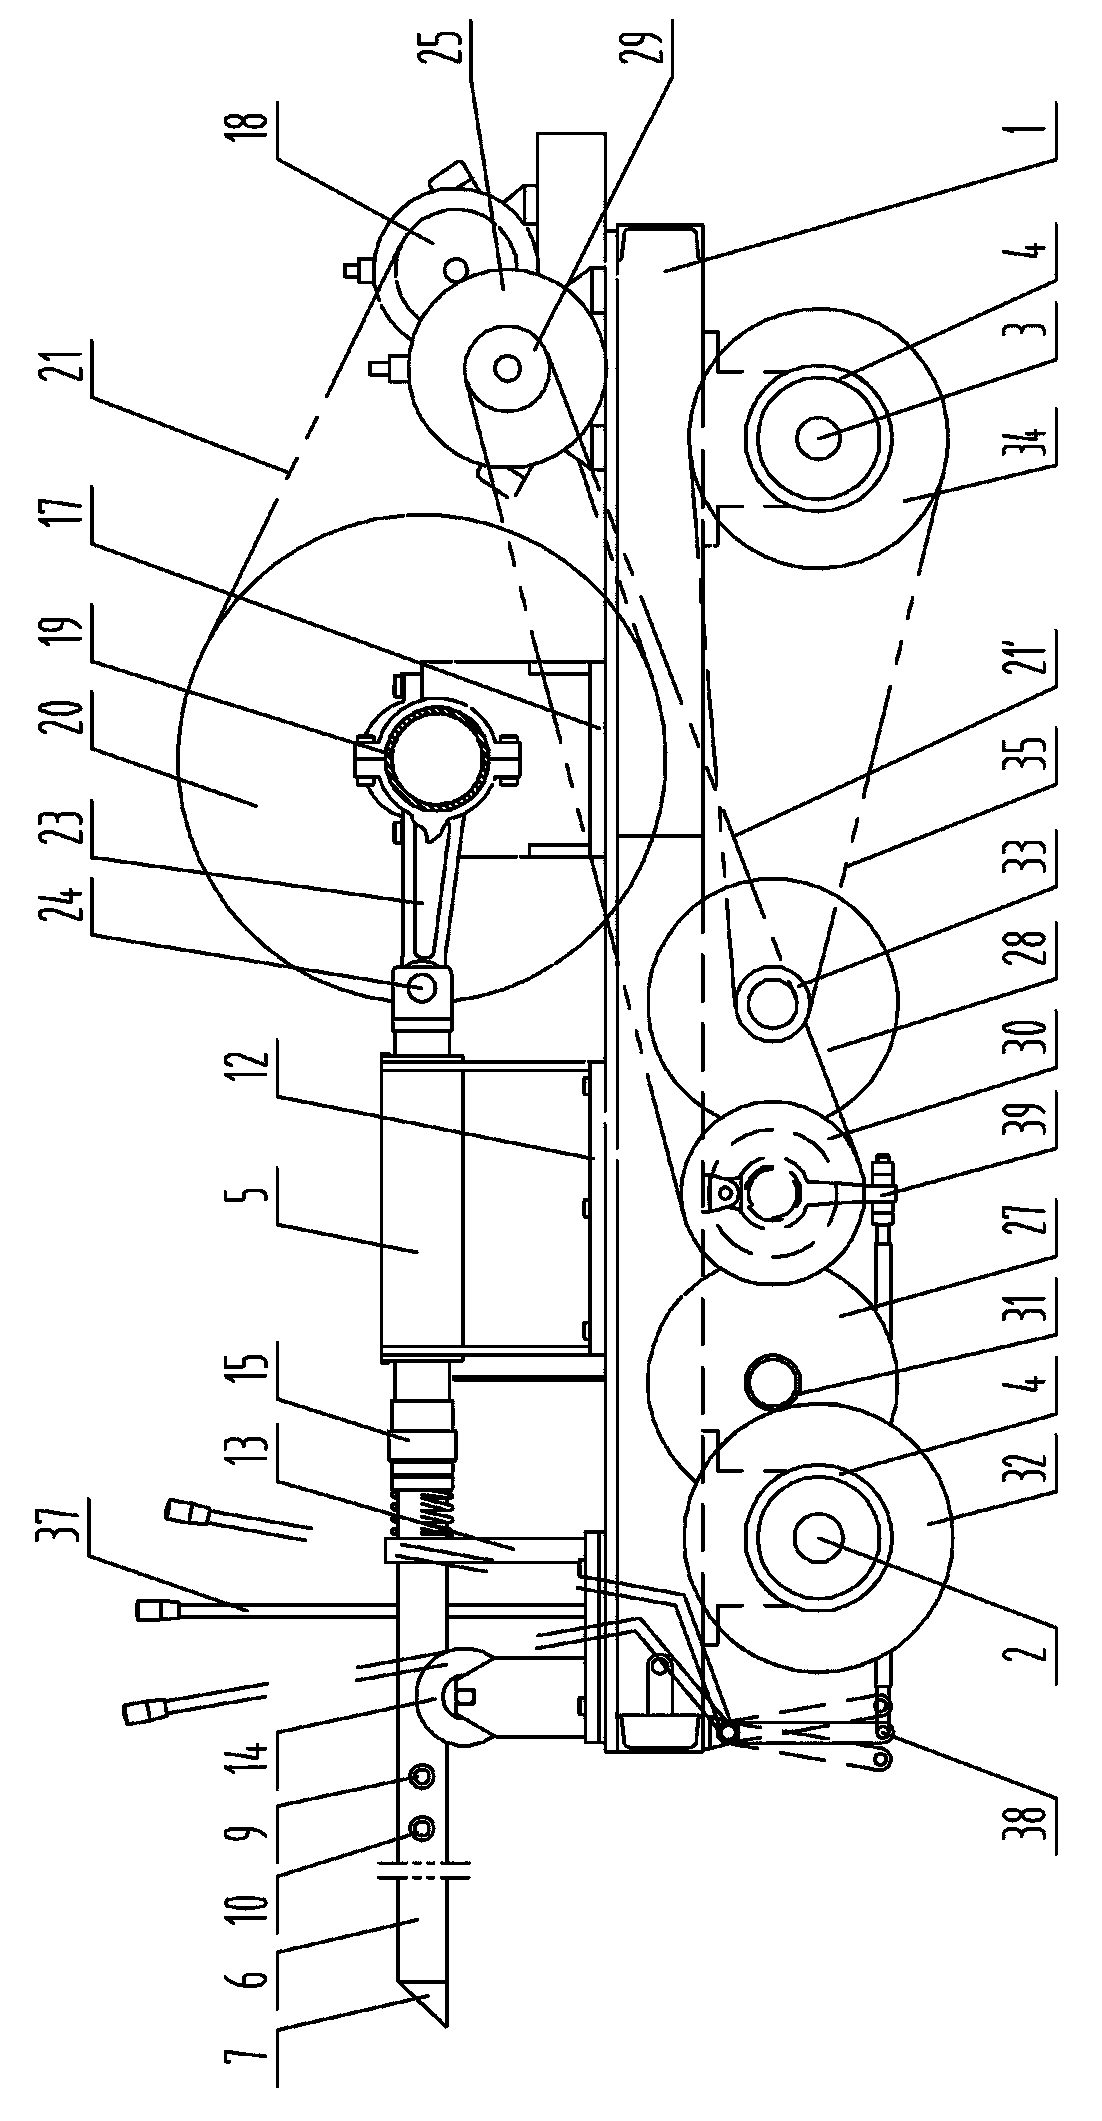 Device for rapidly treating ring formation of rotary kiln and method